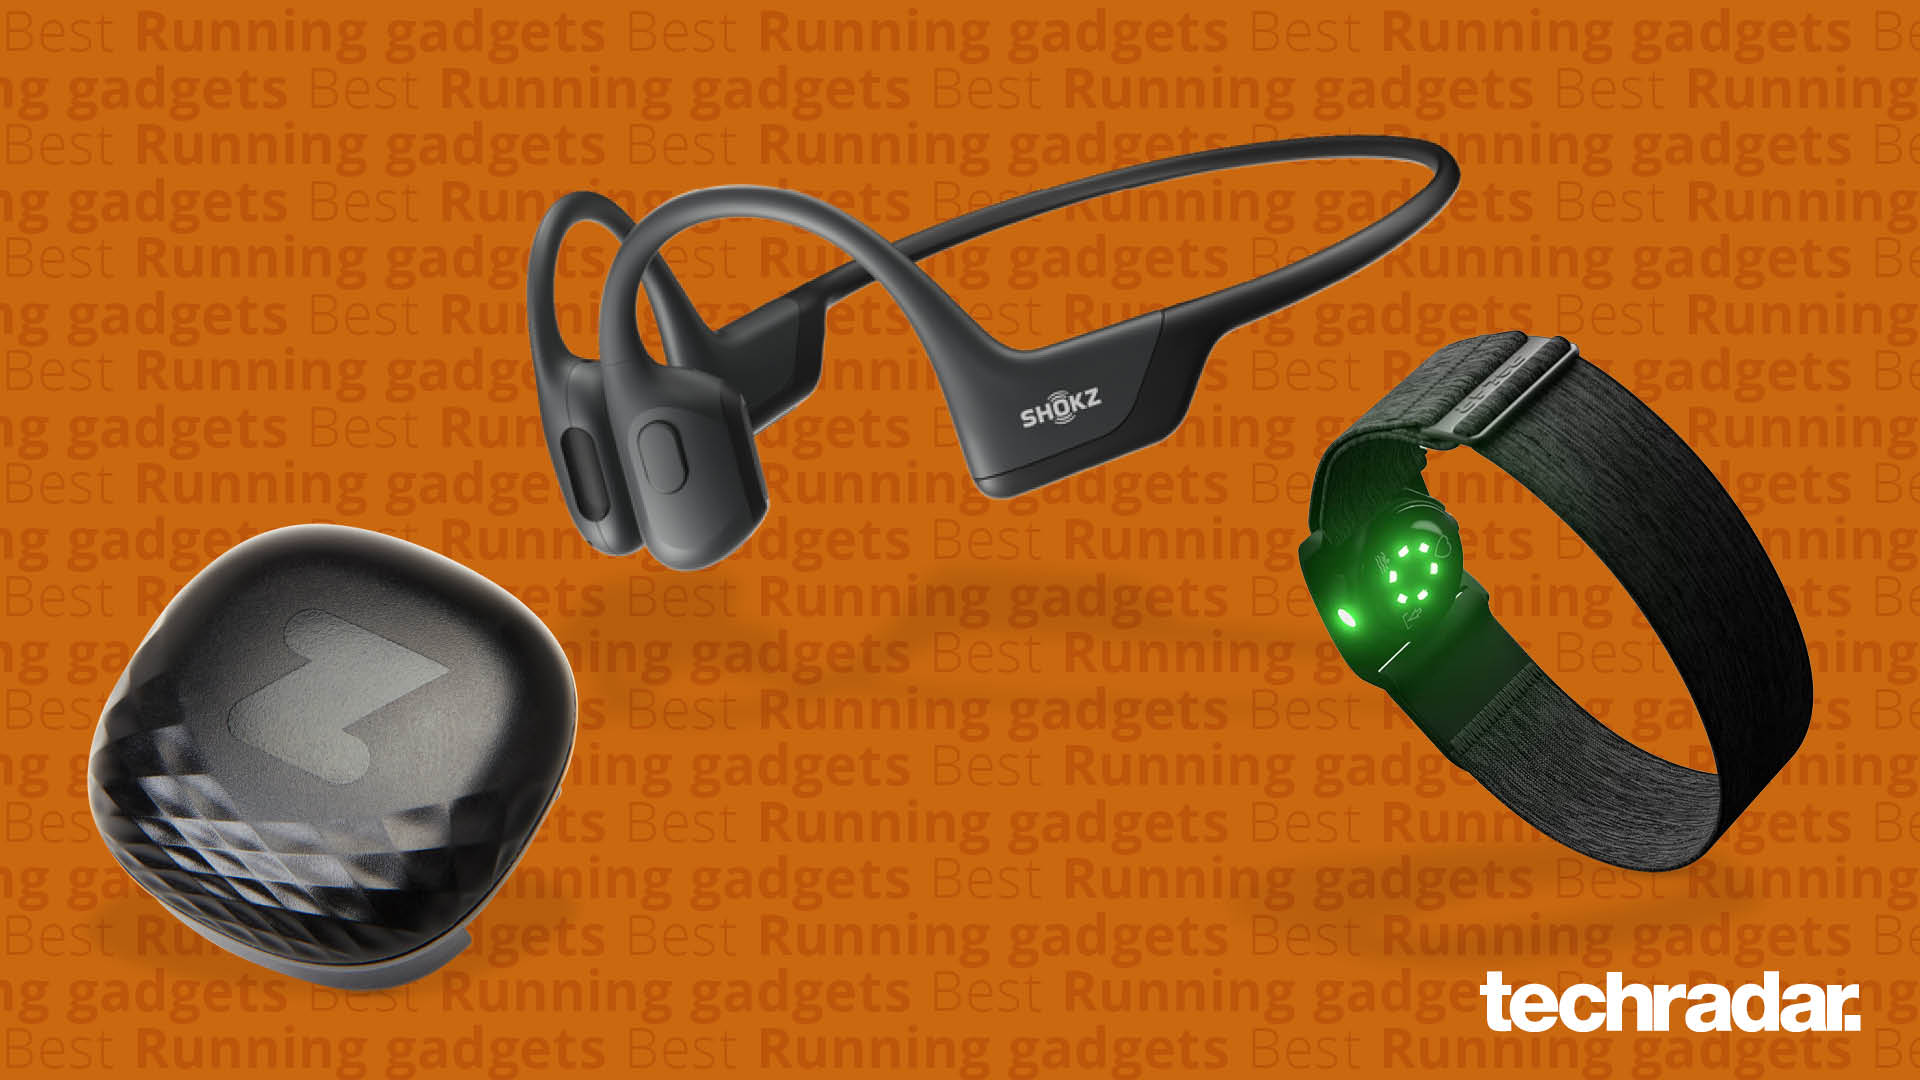 9 new technology gadgets for fitness buffs